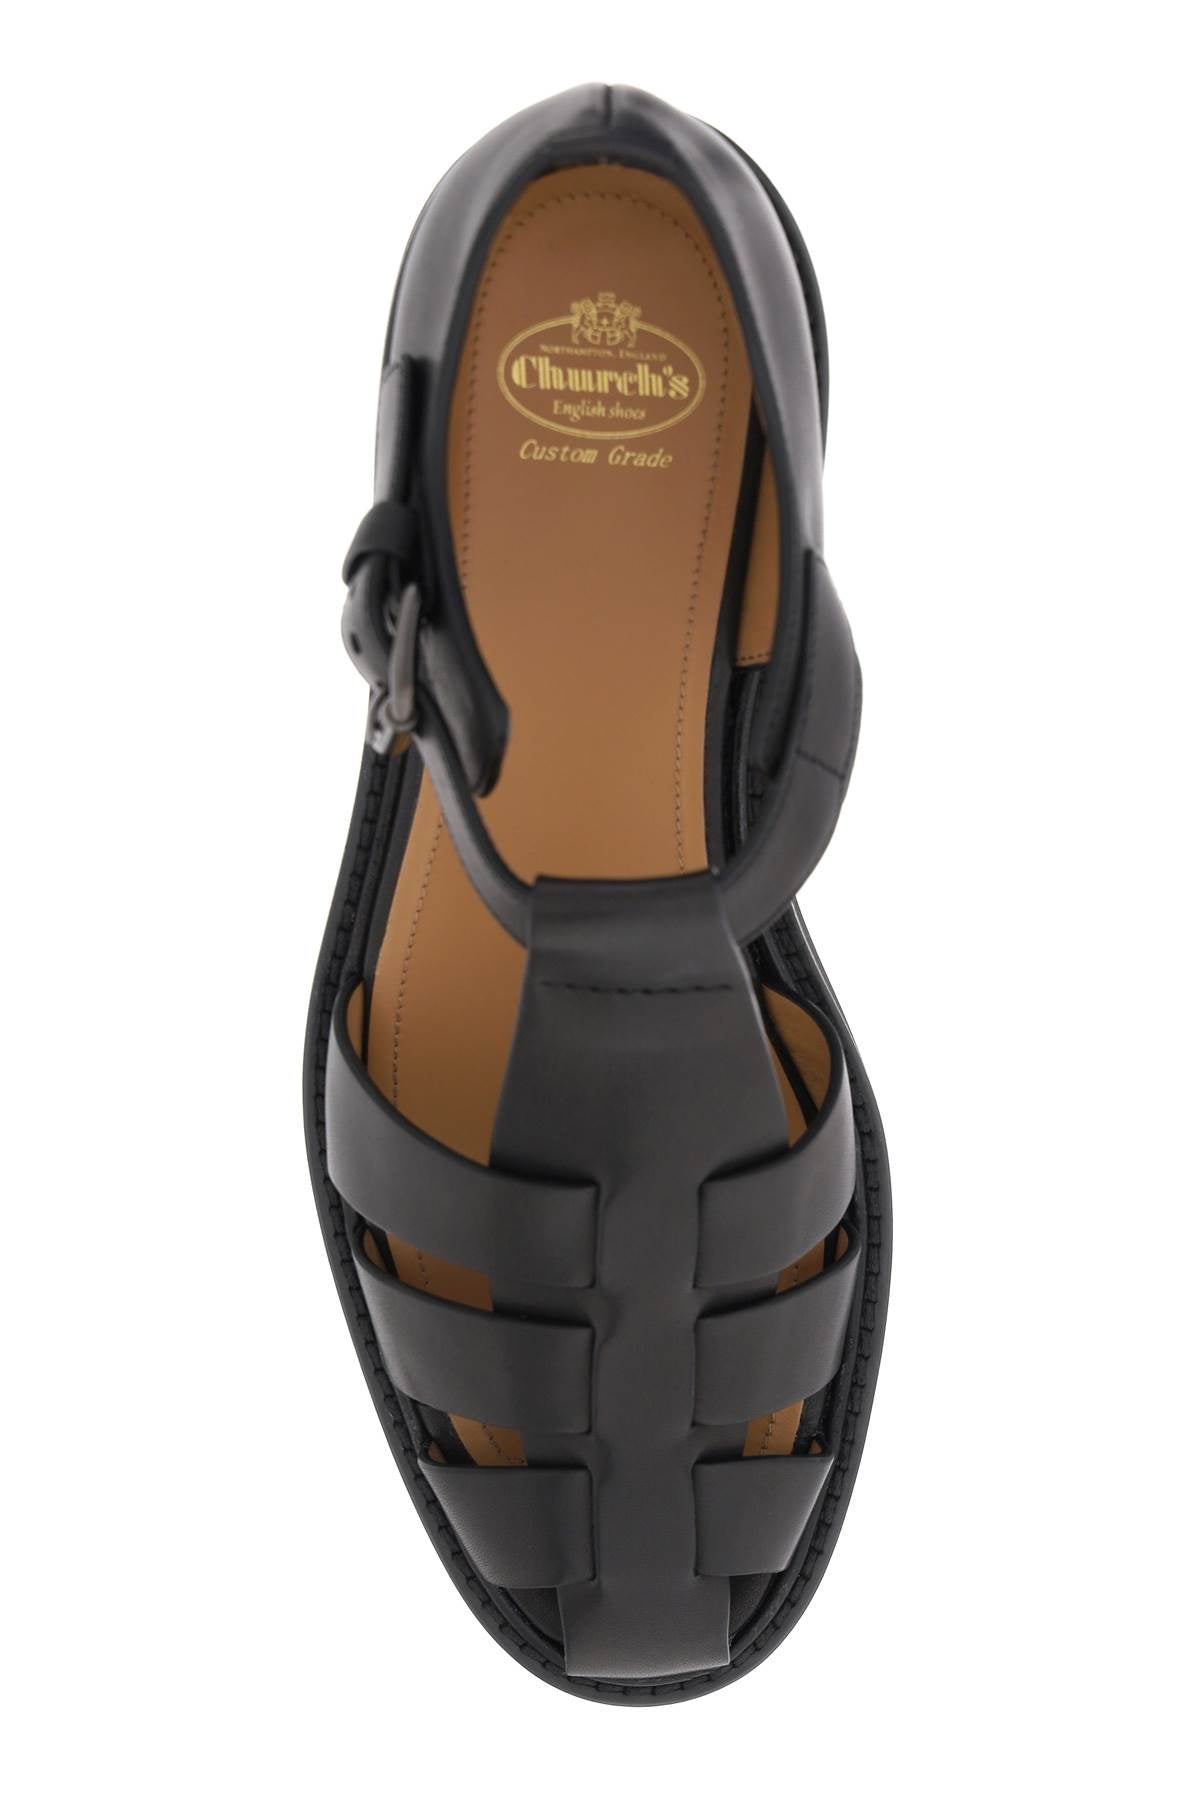 CHURCH'S Handcrafted Woven Leather Sandals with Extra Padding and Lightweight Sole for Women